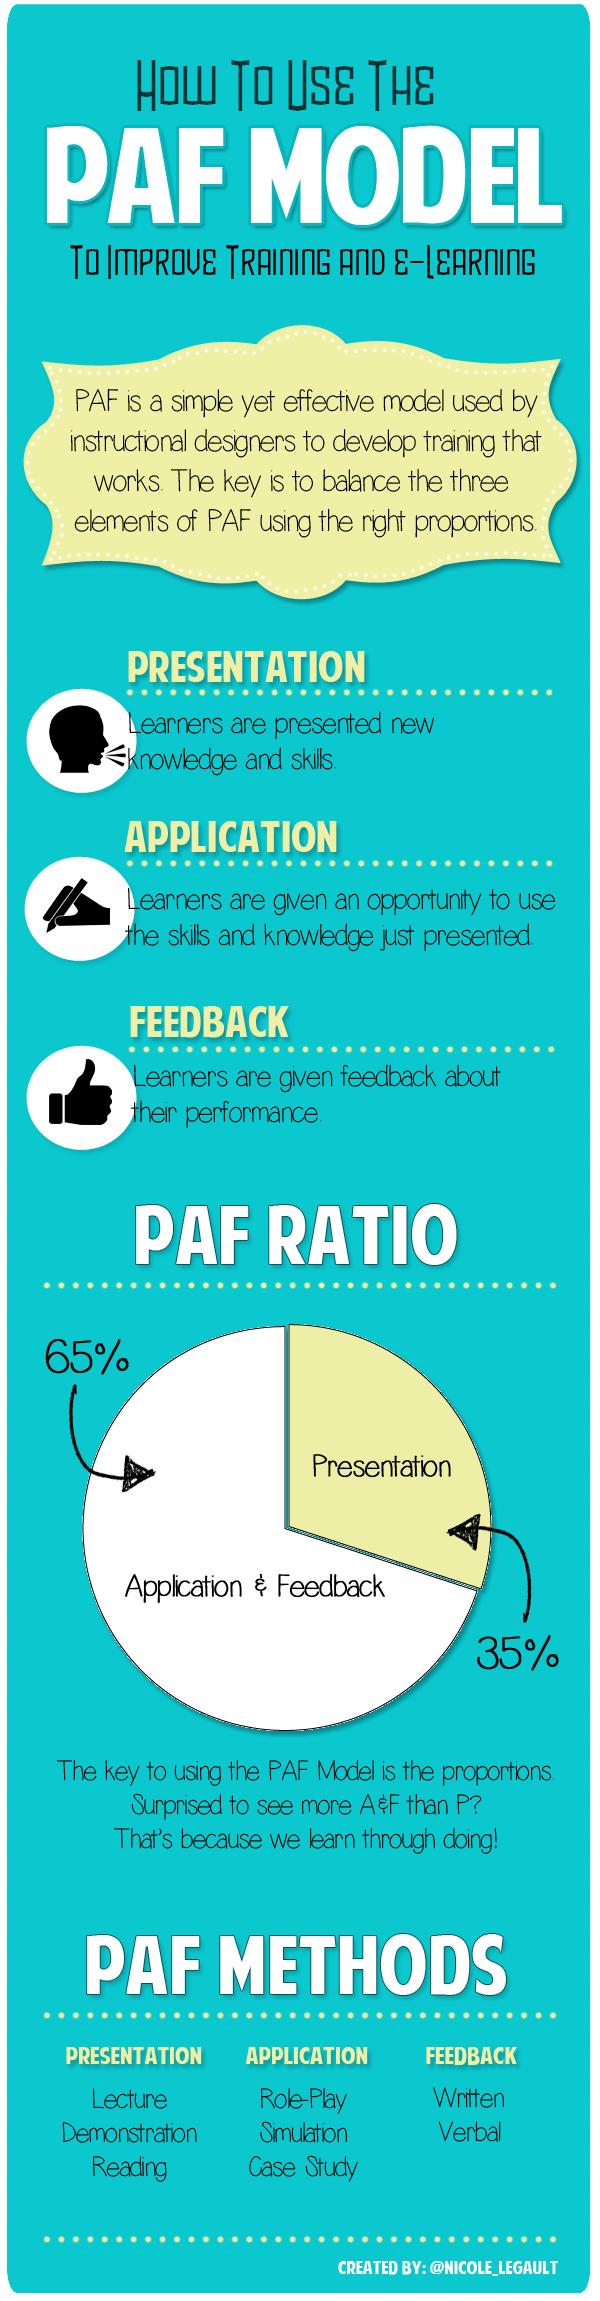 How to Use the PAF Model to Improve Training and e-Learning Infographic